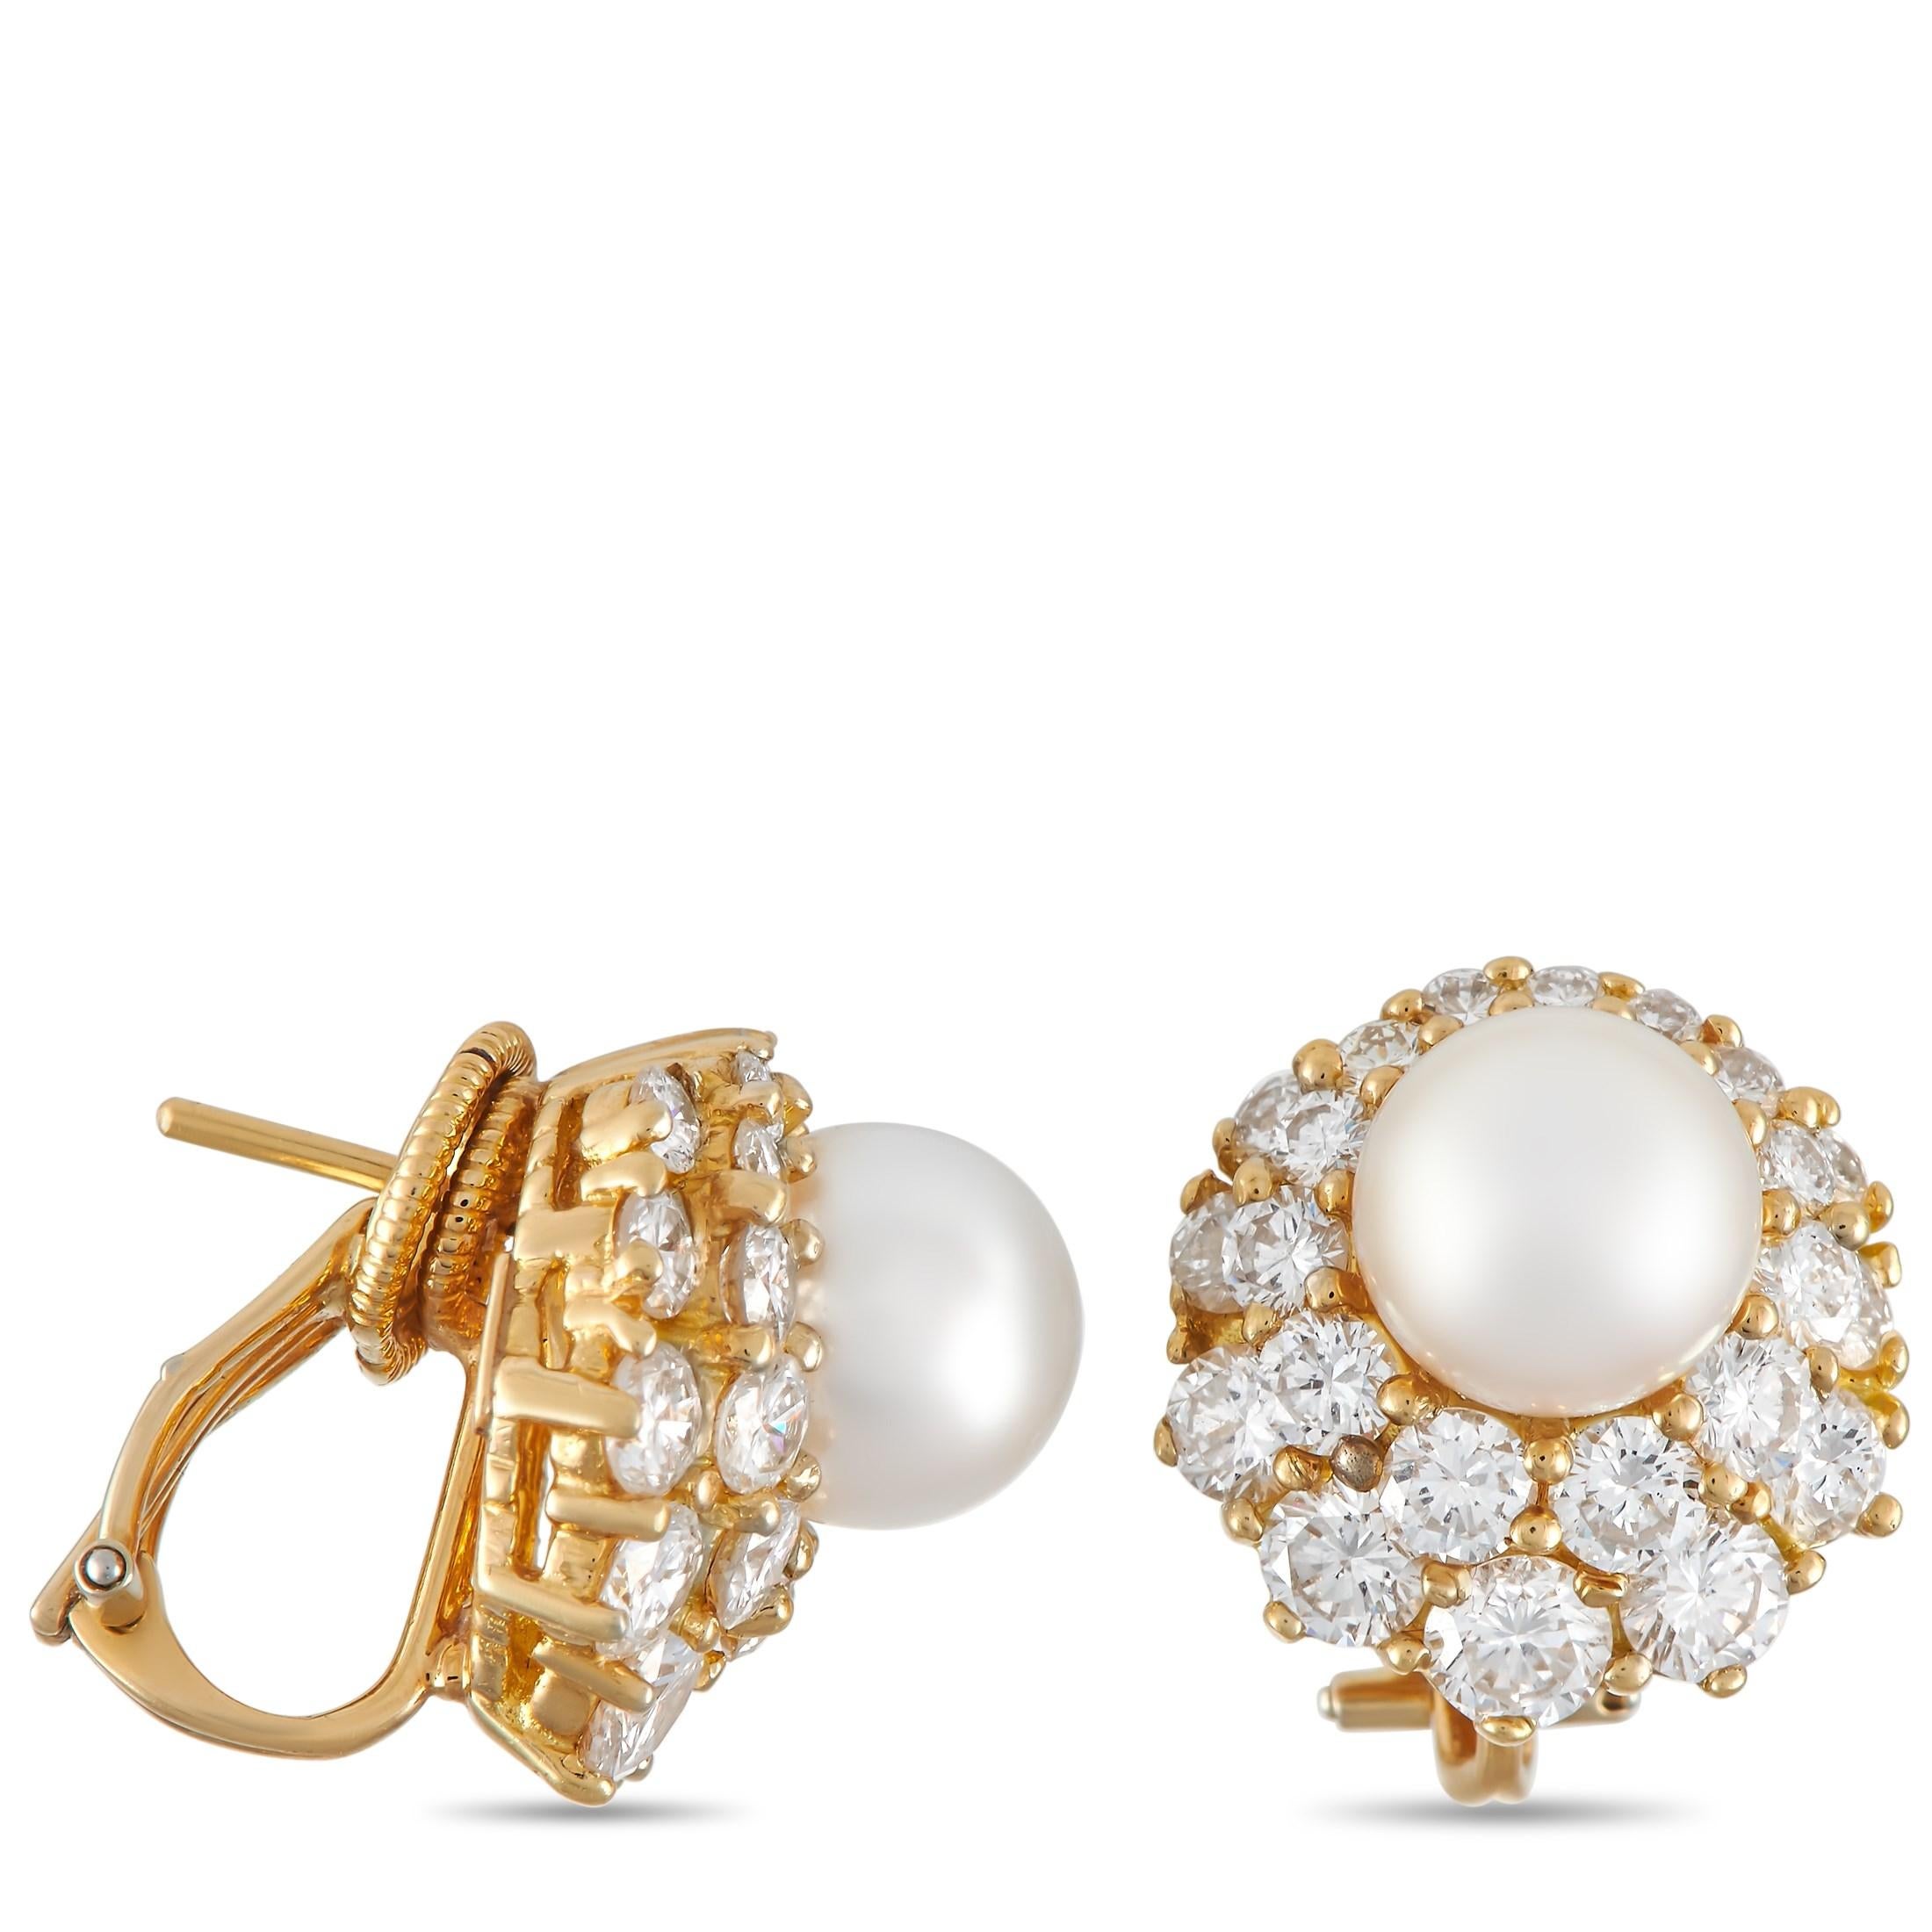 With class and sophistication that has effortlessly endured the test of time, this Harry Winston 18K Yellow Gold 3.70 ct Diamond and Pearl Earrings will complete your jewelry collection. Each earring features a yellow gold frame with omega back